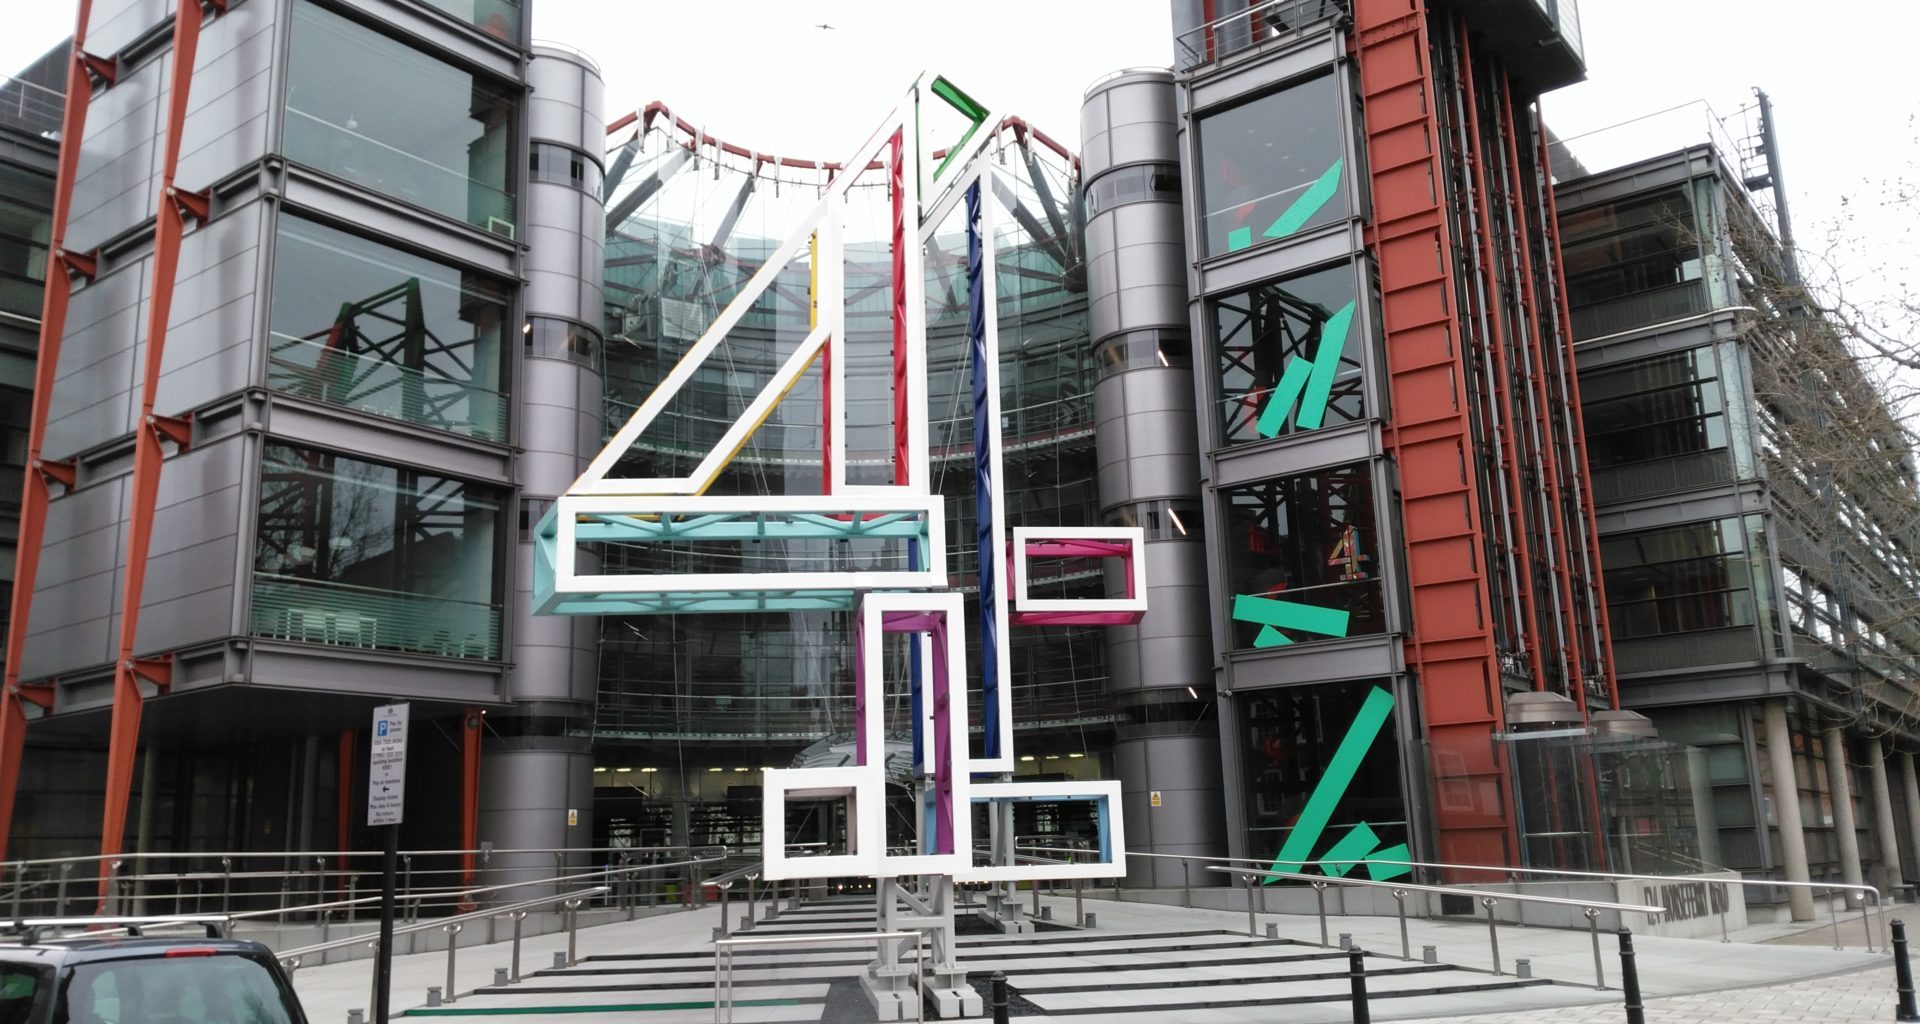 Claim Channel 4 is funded by taxpayers is False 3